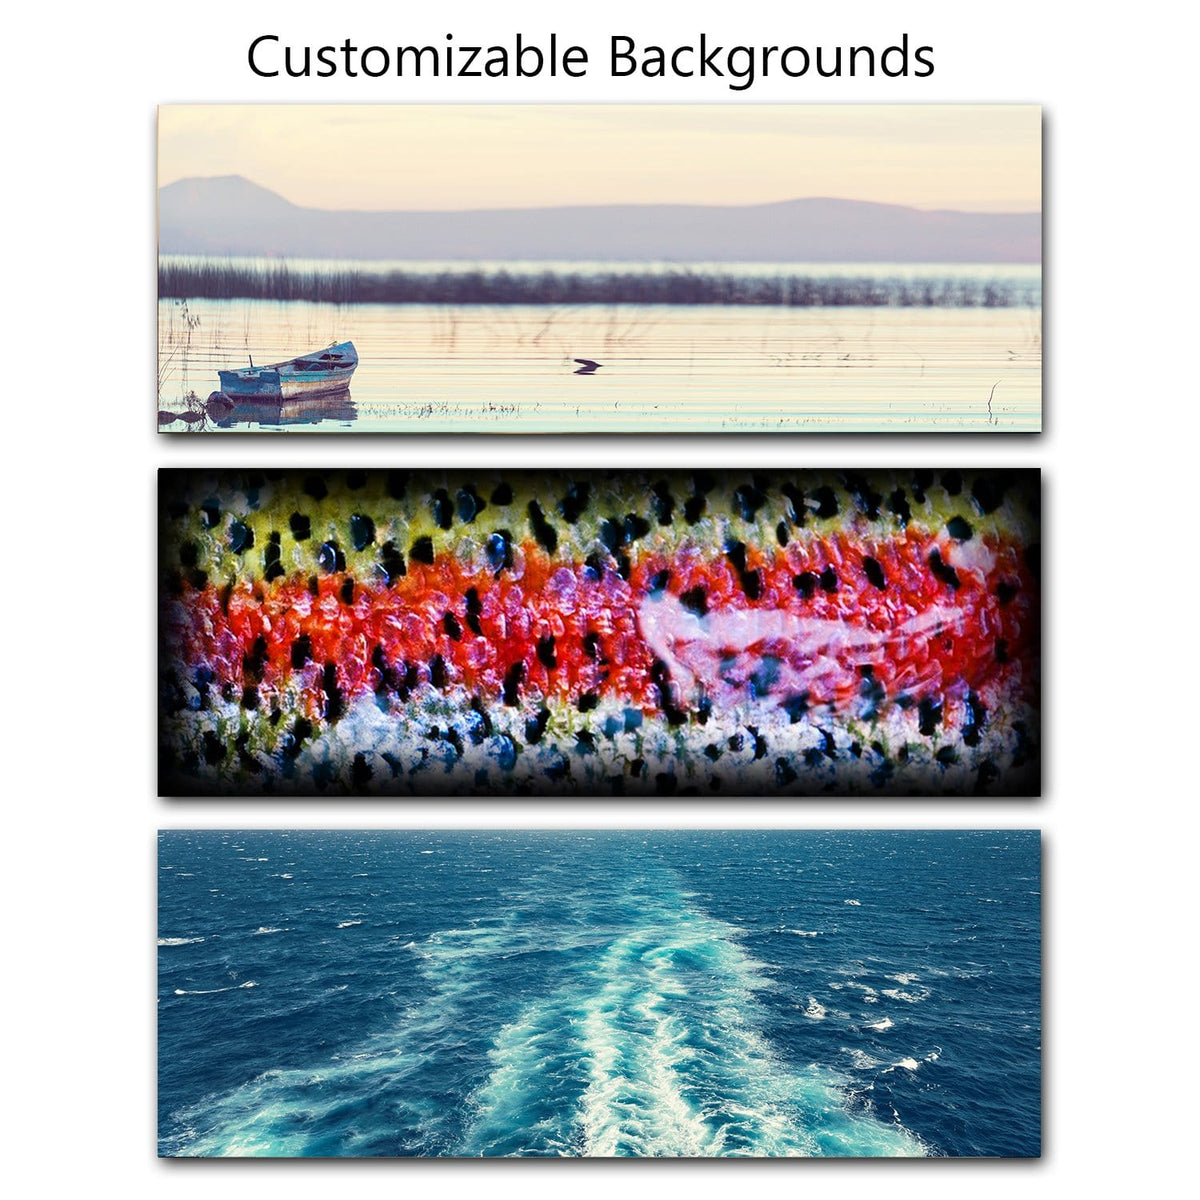 Select from a variety of background styles and colors